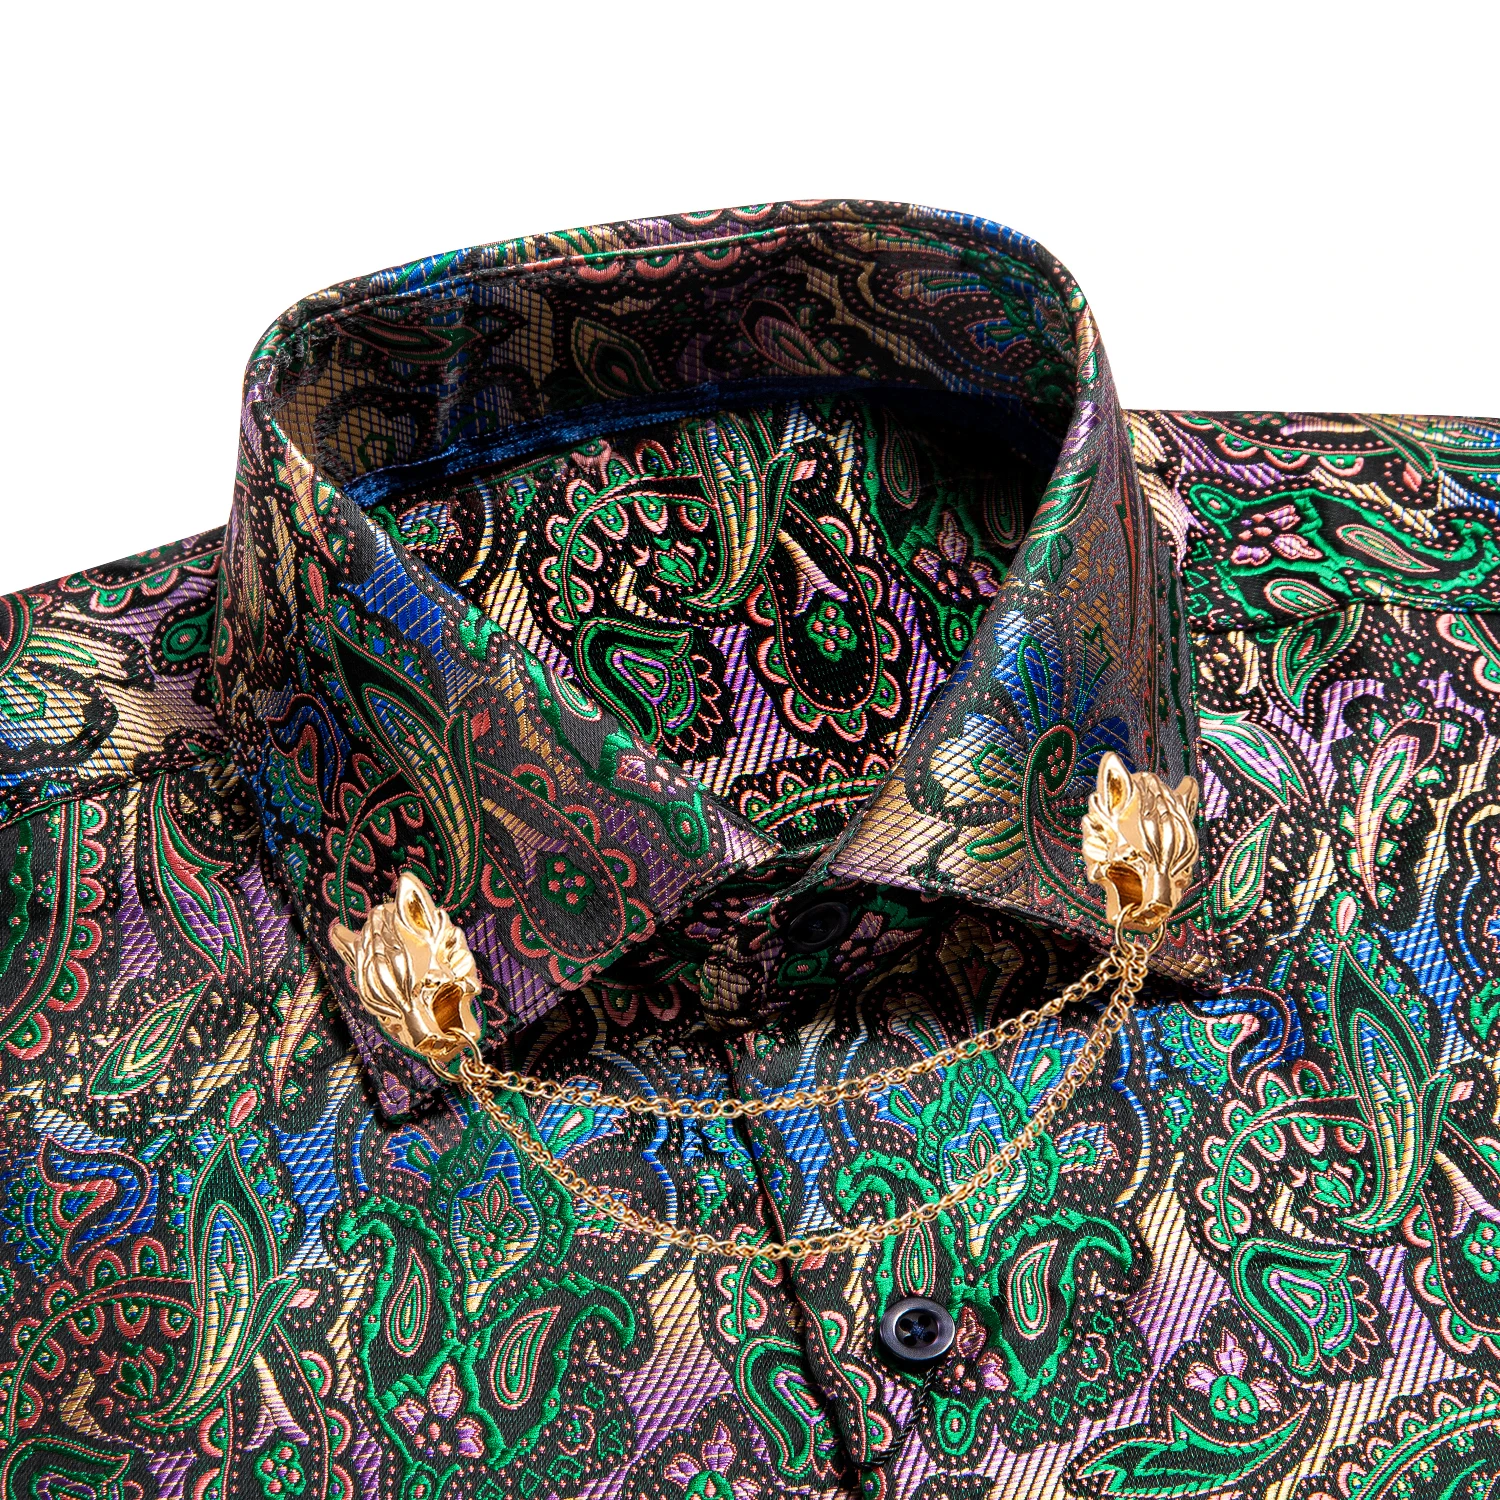 Novelty Men Silk Shirt Teal Green Purple Brown Long Sleeve Slim Fit Paisley Jacquard Shirt For Male Business Party Gifts Hi-Tie